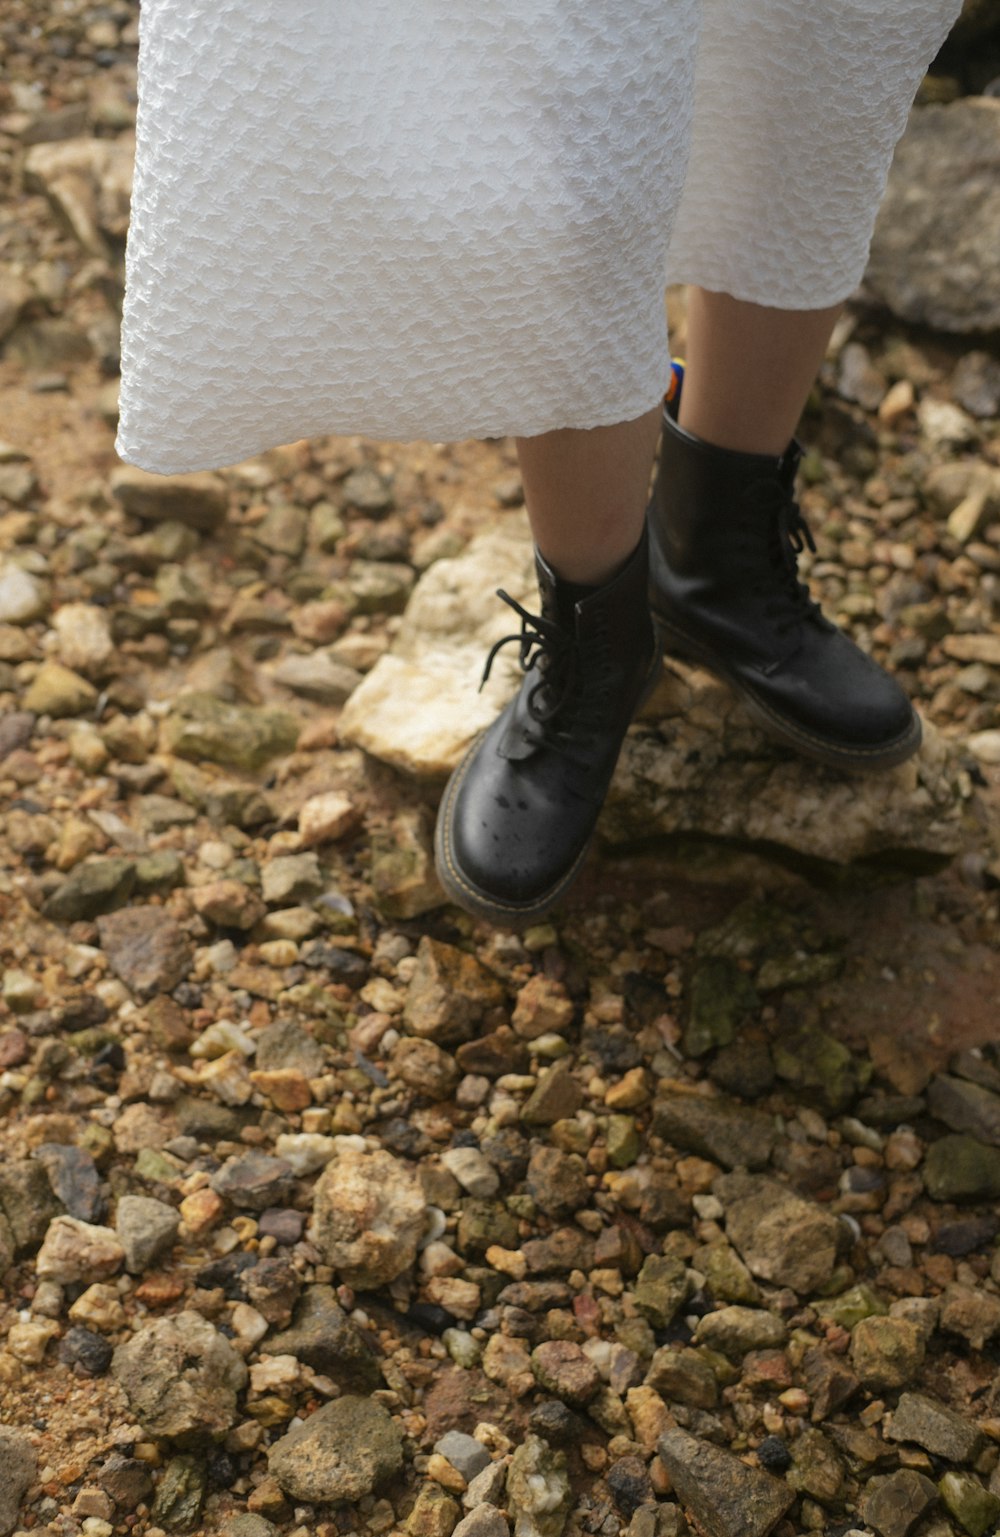 a close up of a person wearing black shoes